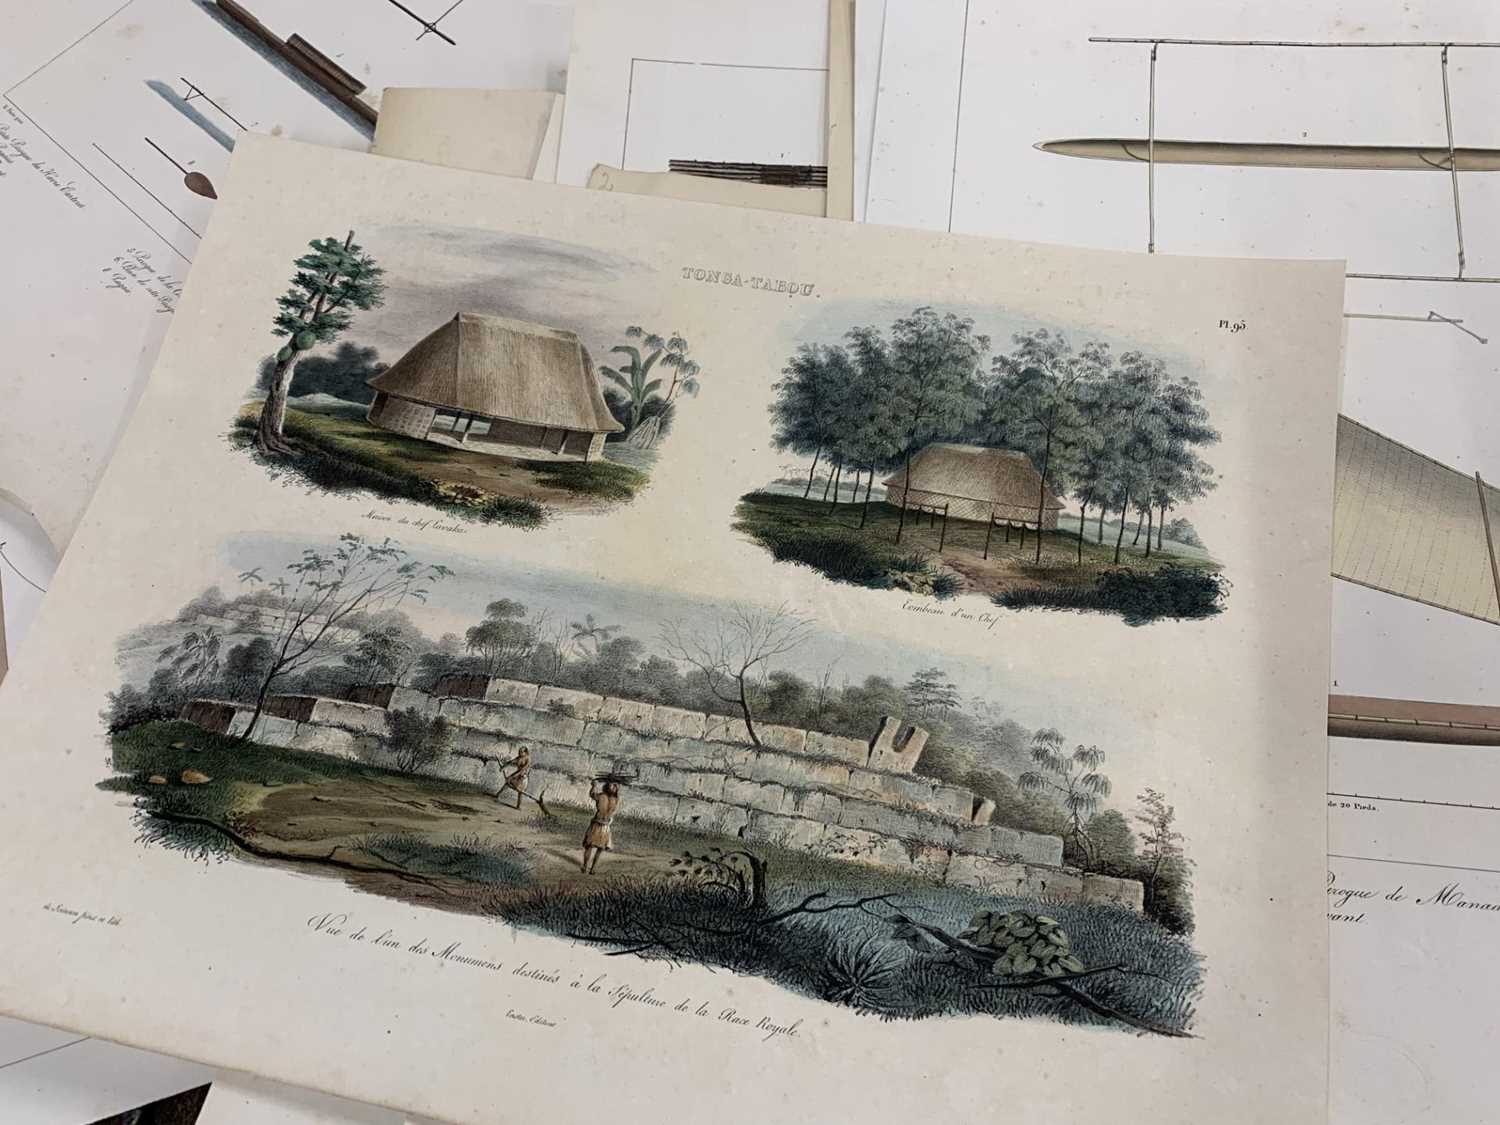 Approx 33 19th century copper plate engravings in colour, printed by Lemercier, Langlume, A. Belin - Image 3 of 8